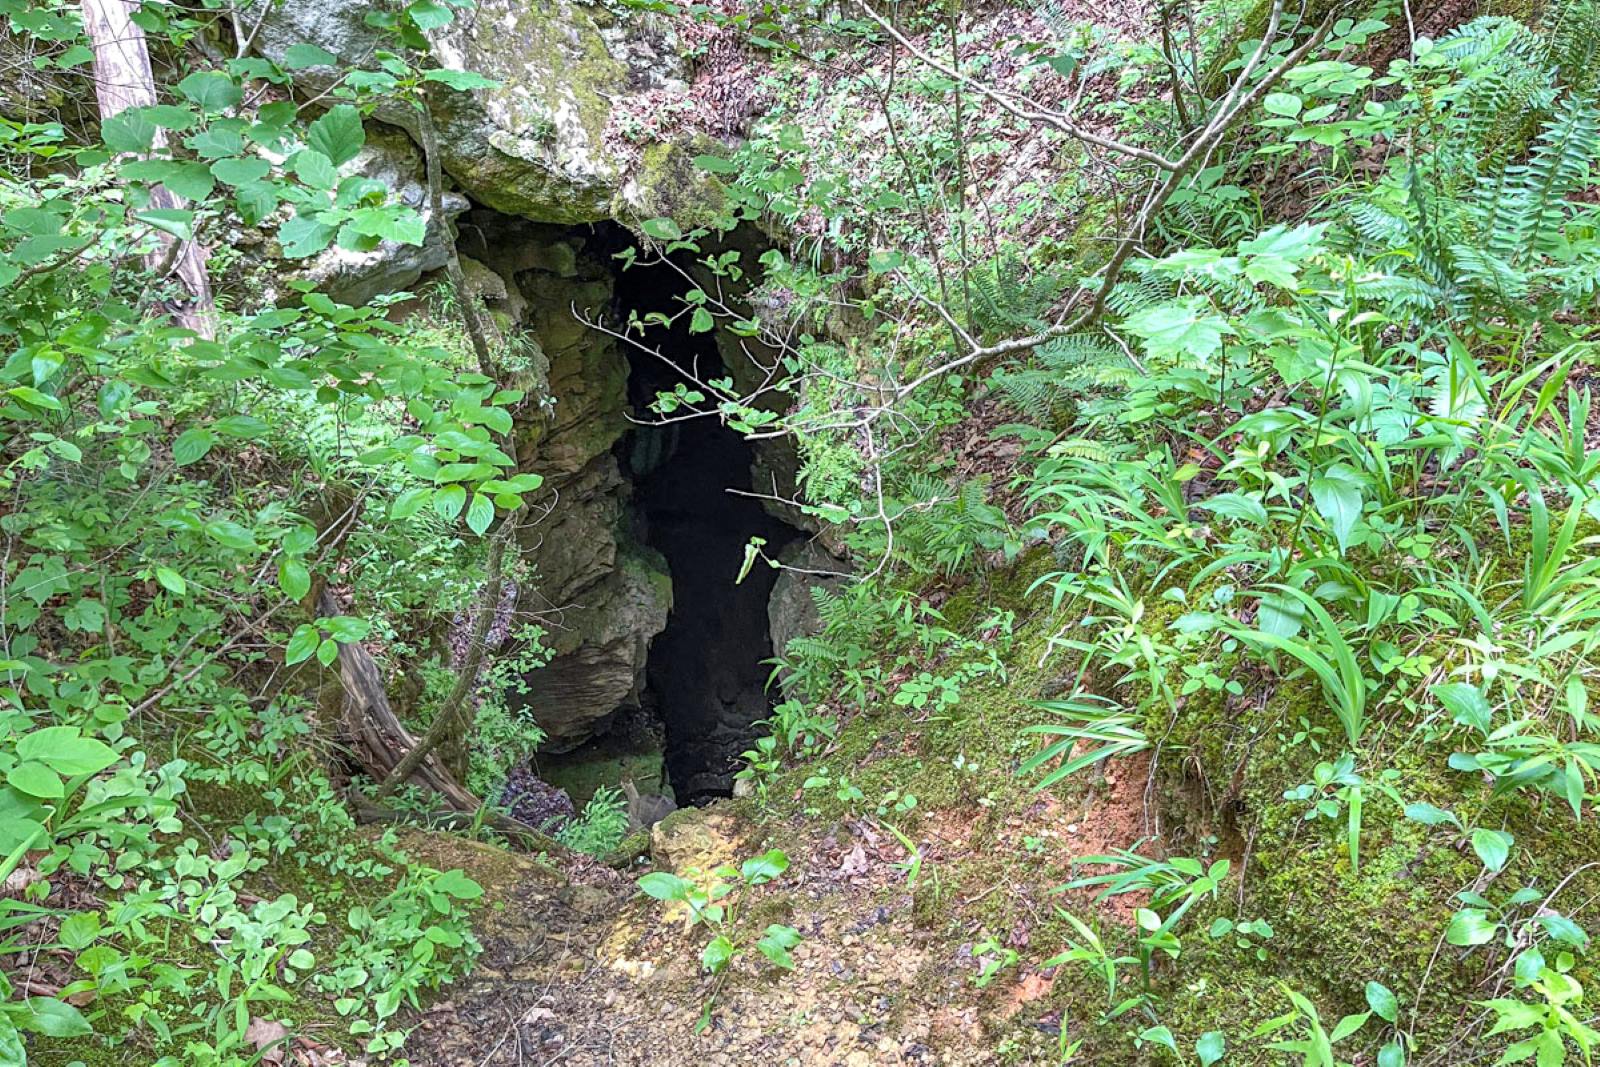 The trail that continues downstream from Broadwater Hollow Falls passes this off-limits cave known as Devil’s Den. (Photo by Sony Hocklander)